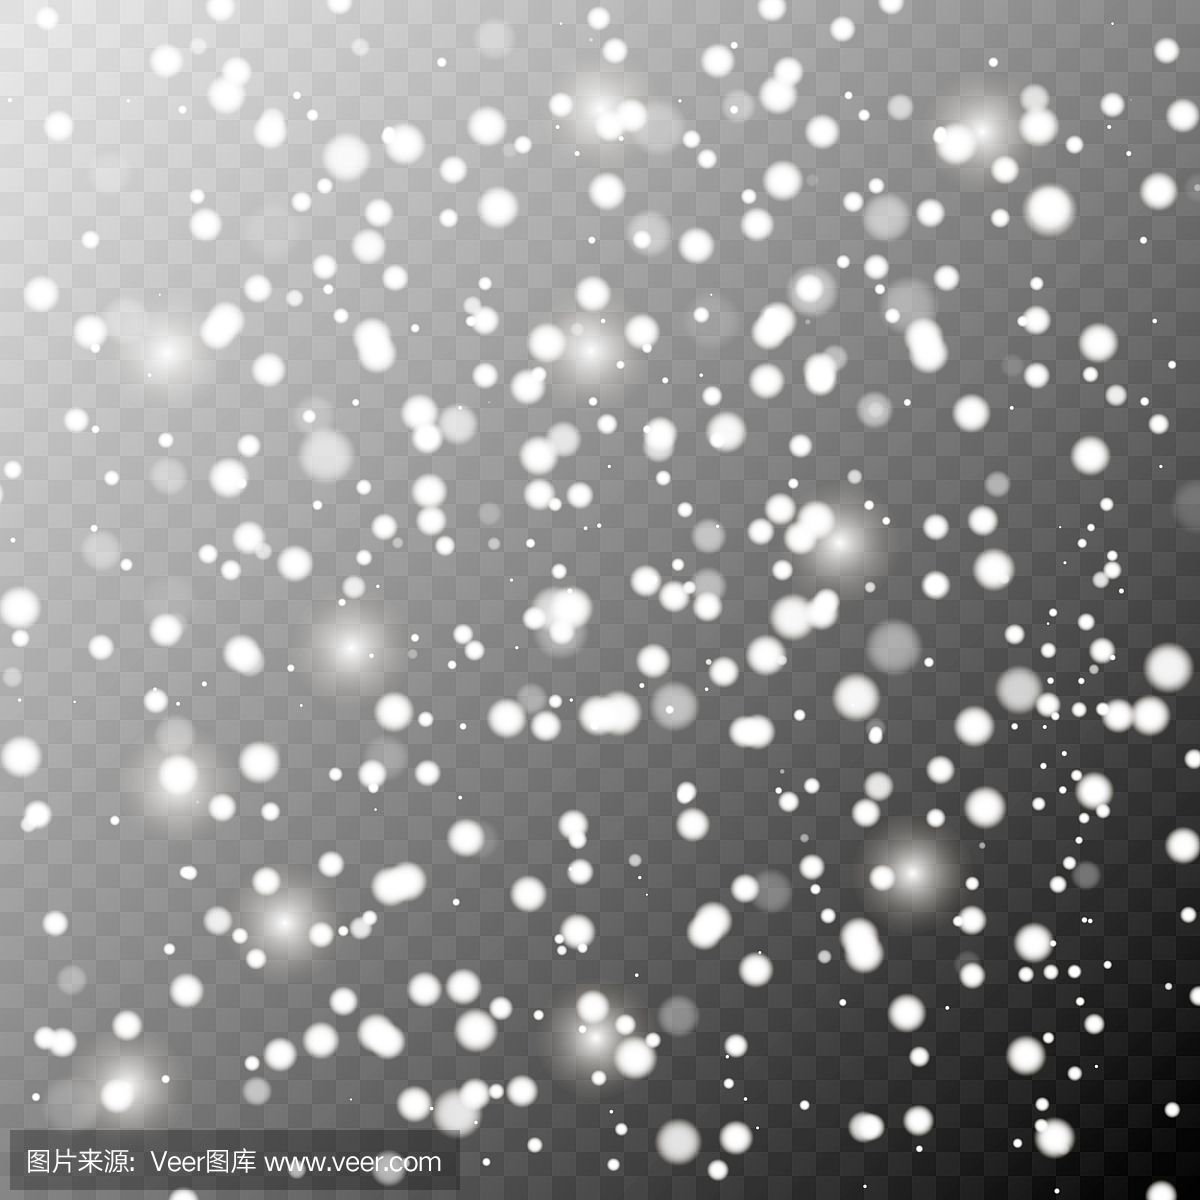 Vector falling snow effect isolated on transpare